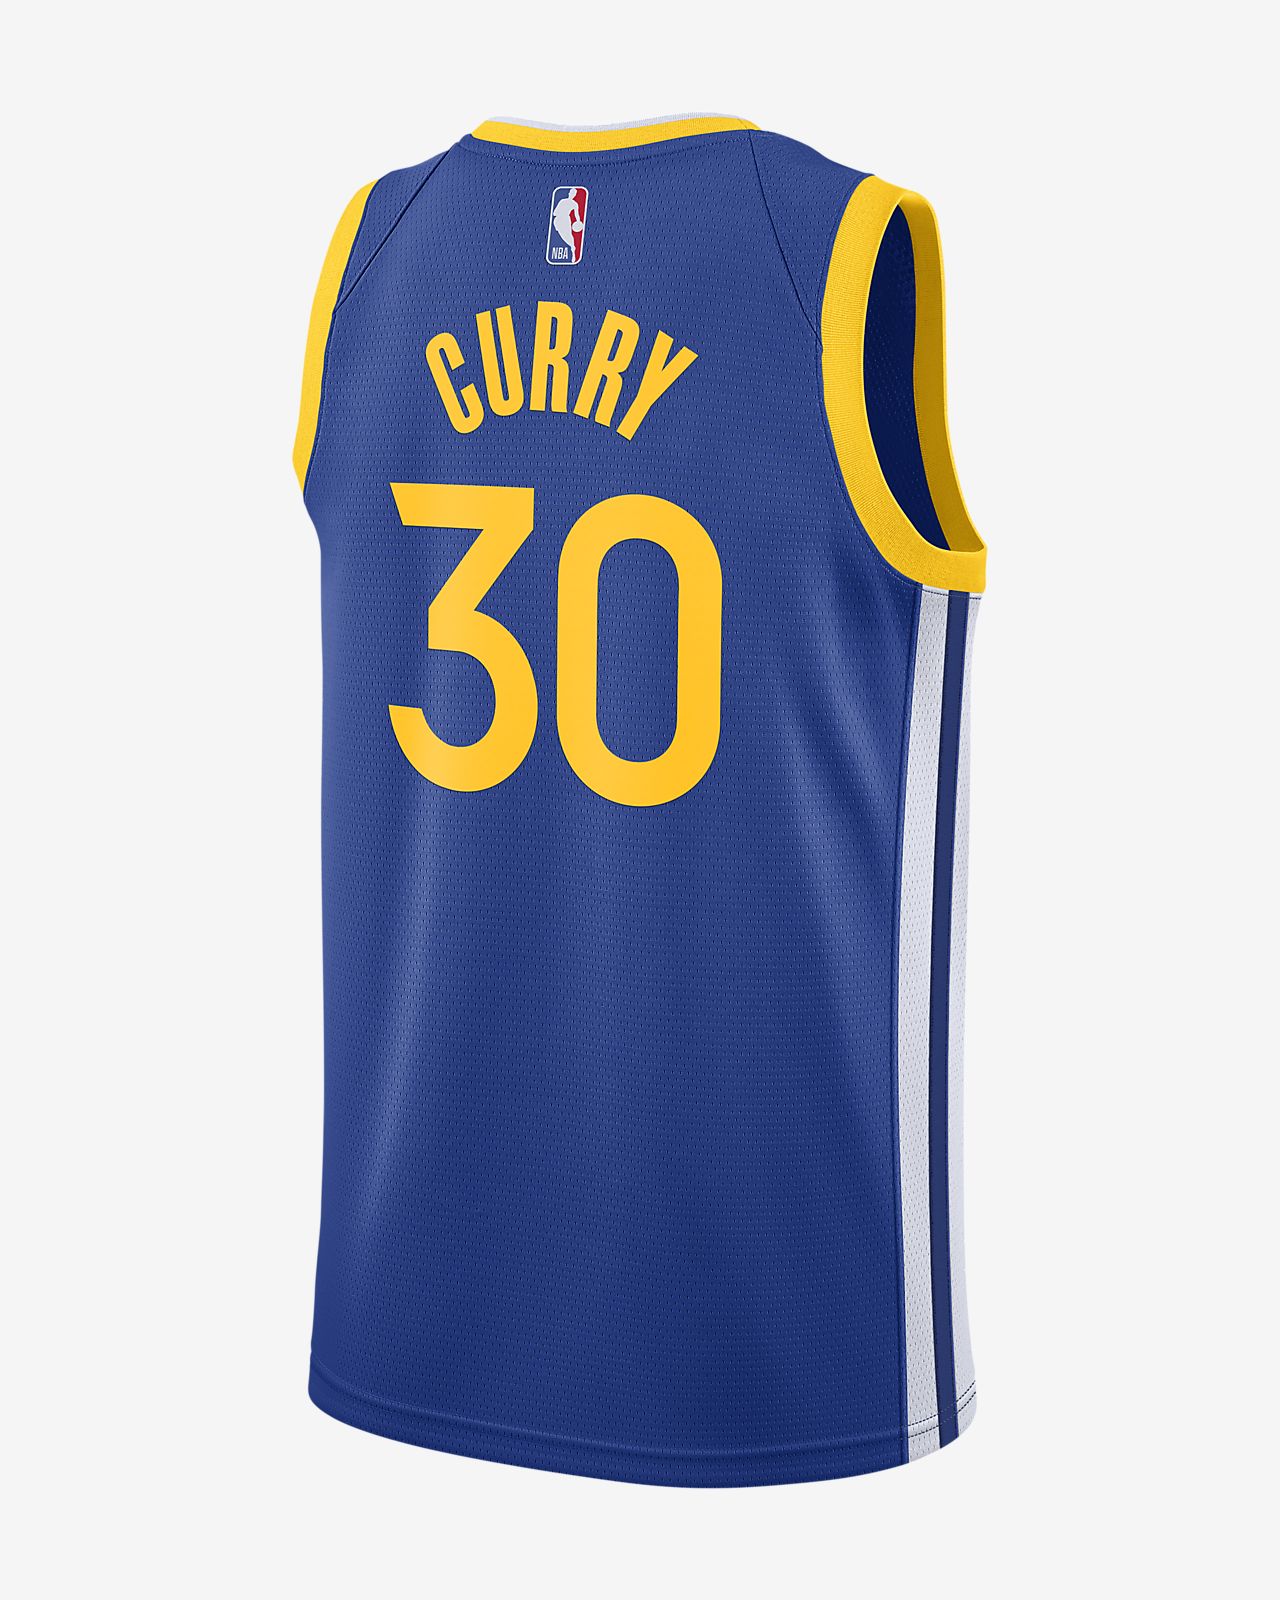 stephen curry jersey youth amazon